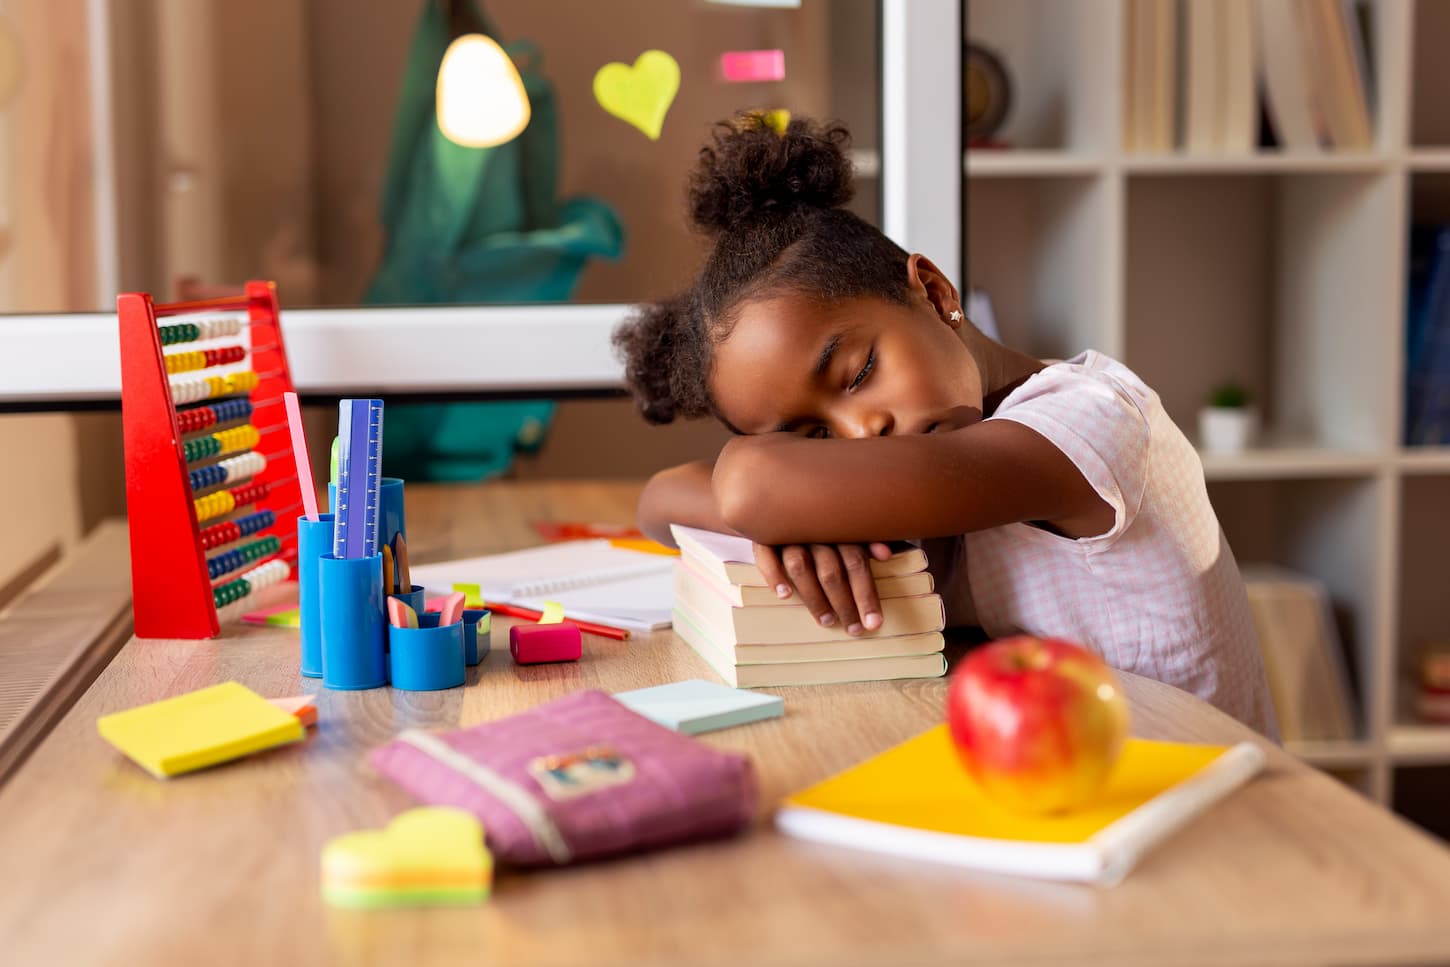 An image of a beautiful little girl tired of doing her homework, sleeping at her desk, using a pile of books as a pillow.